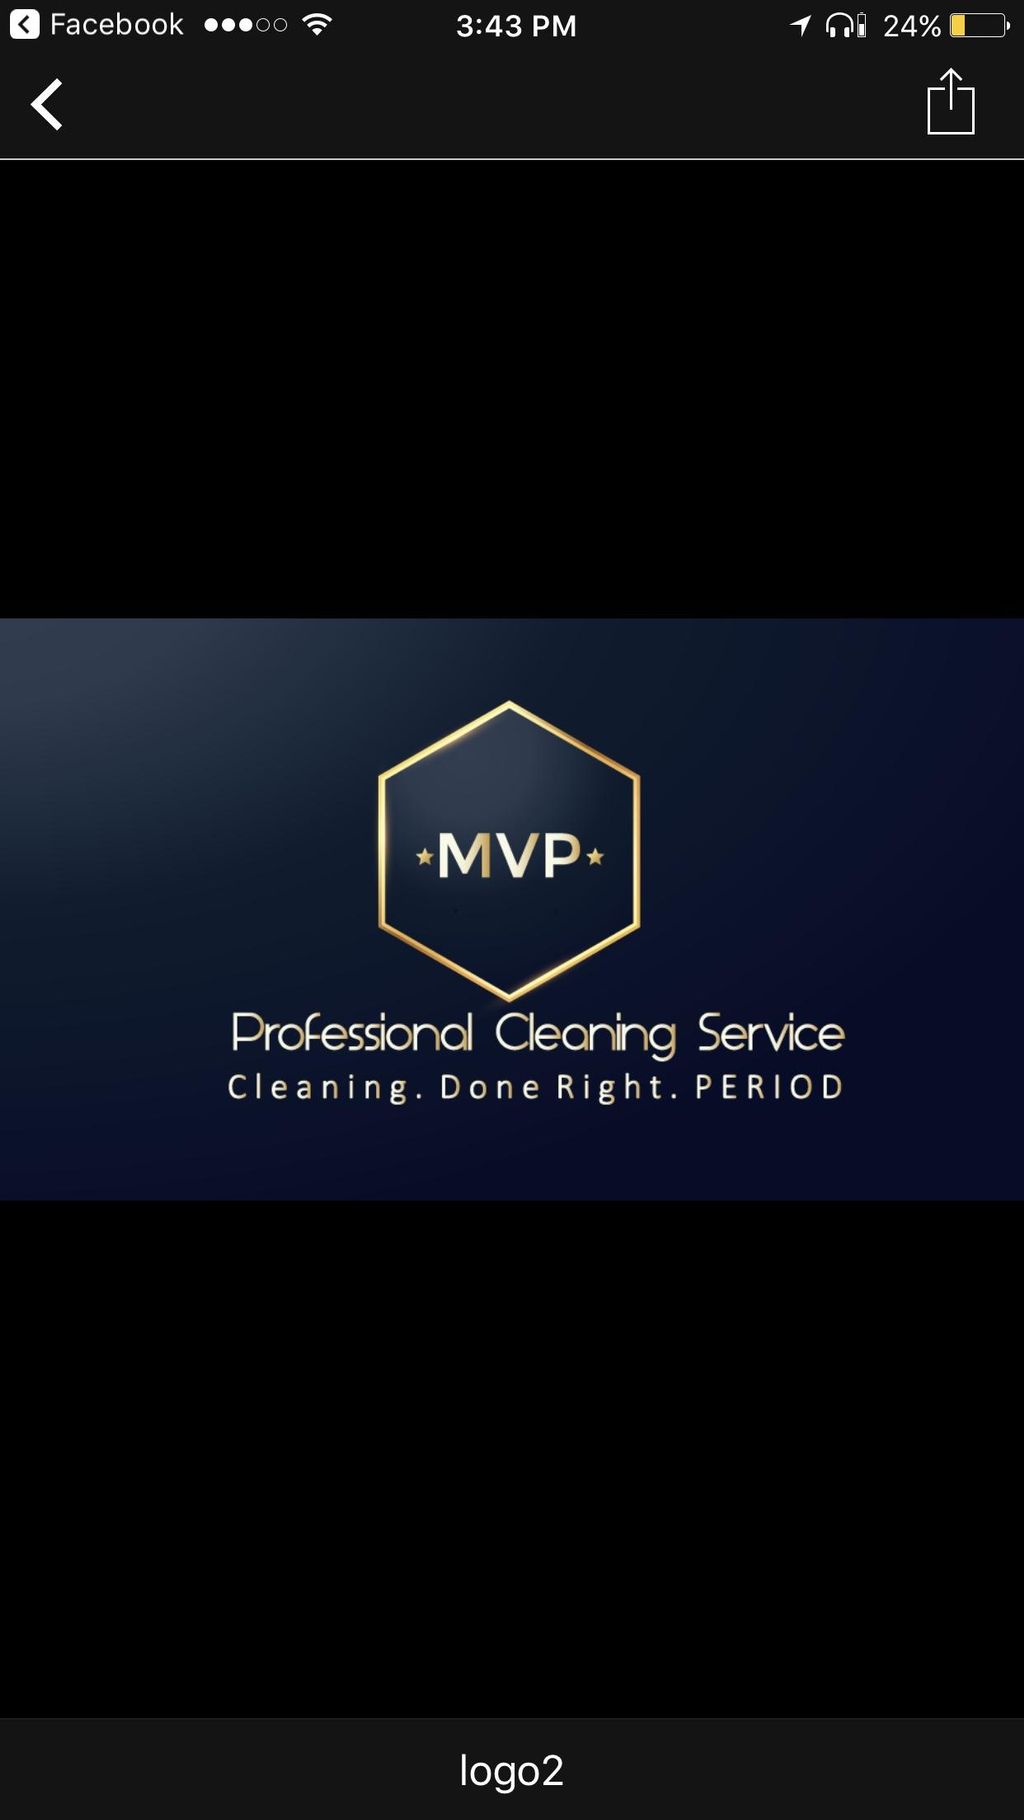 MVP Professional Cleaning Service